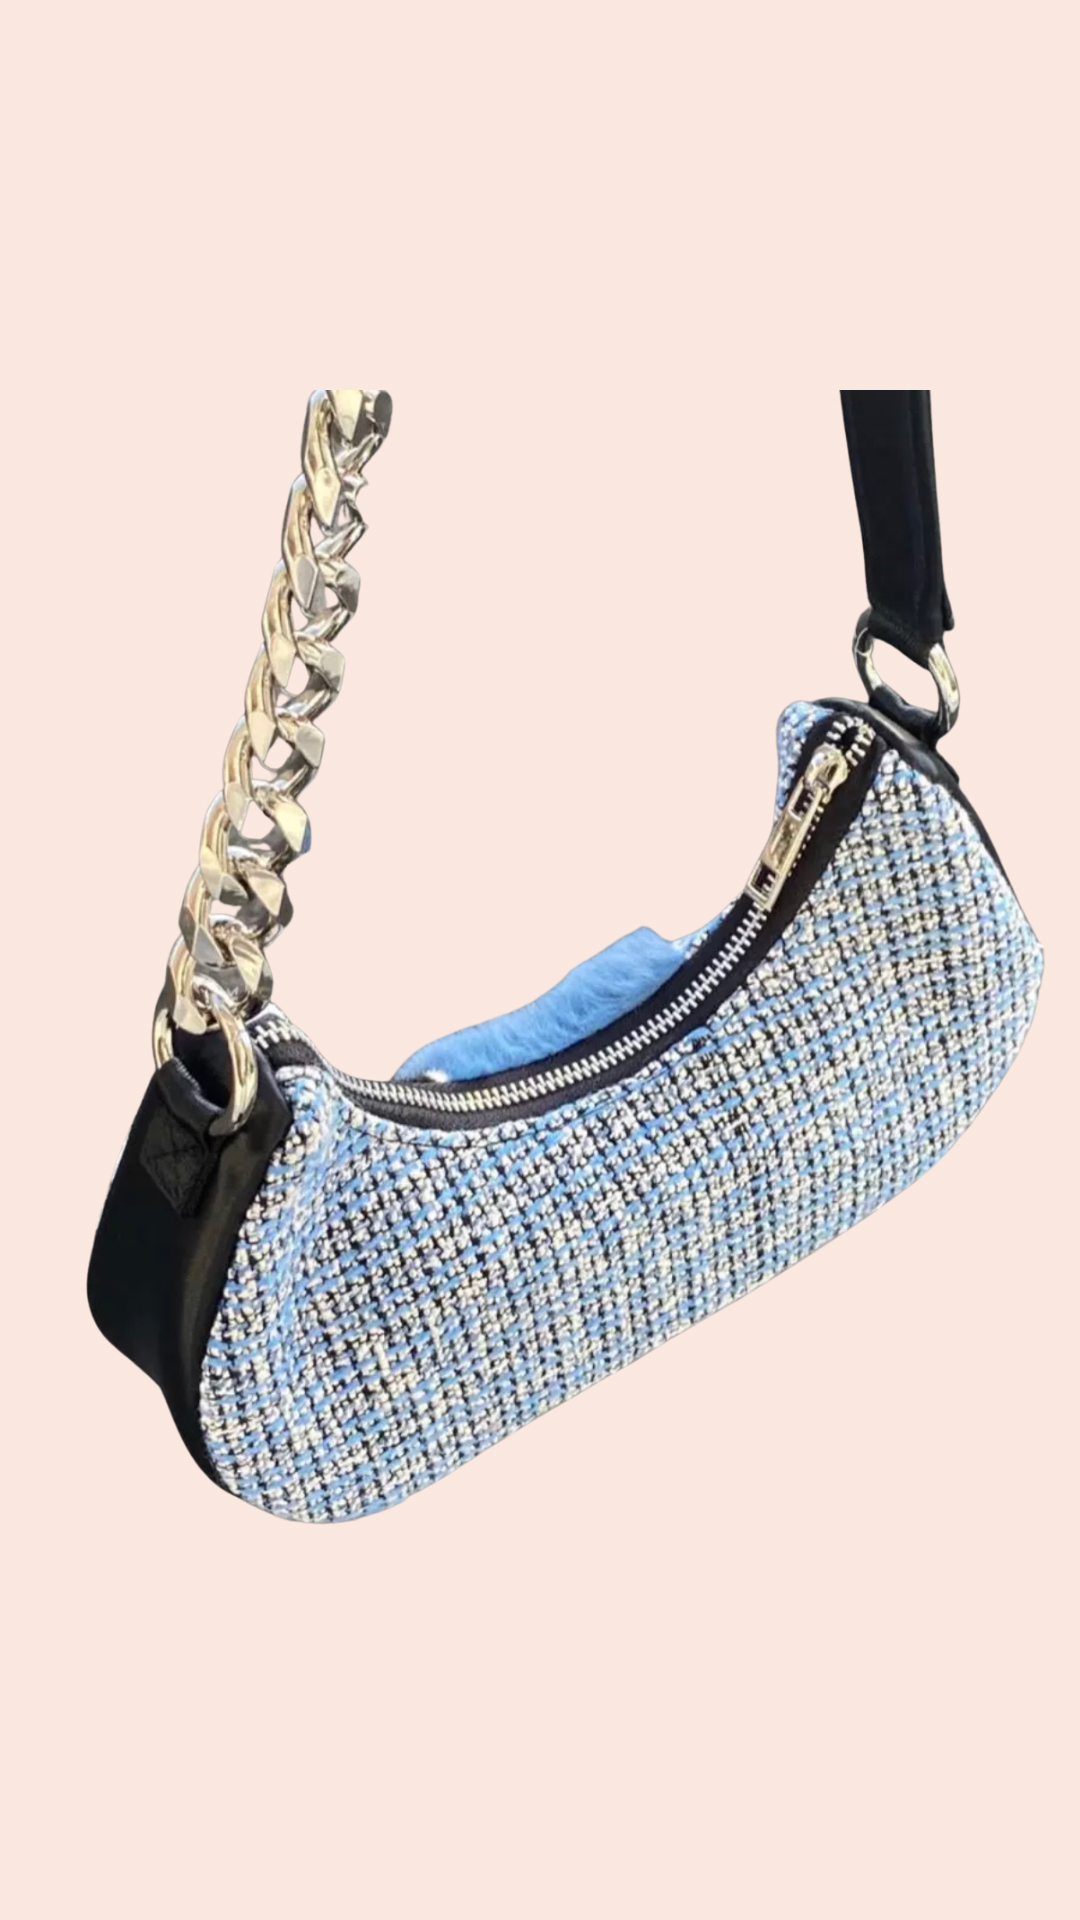 Patchwork Purse - Twice the Charm